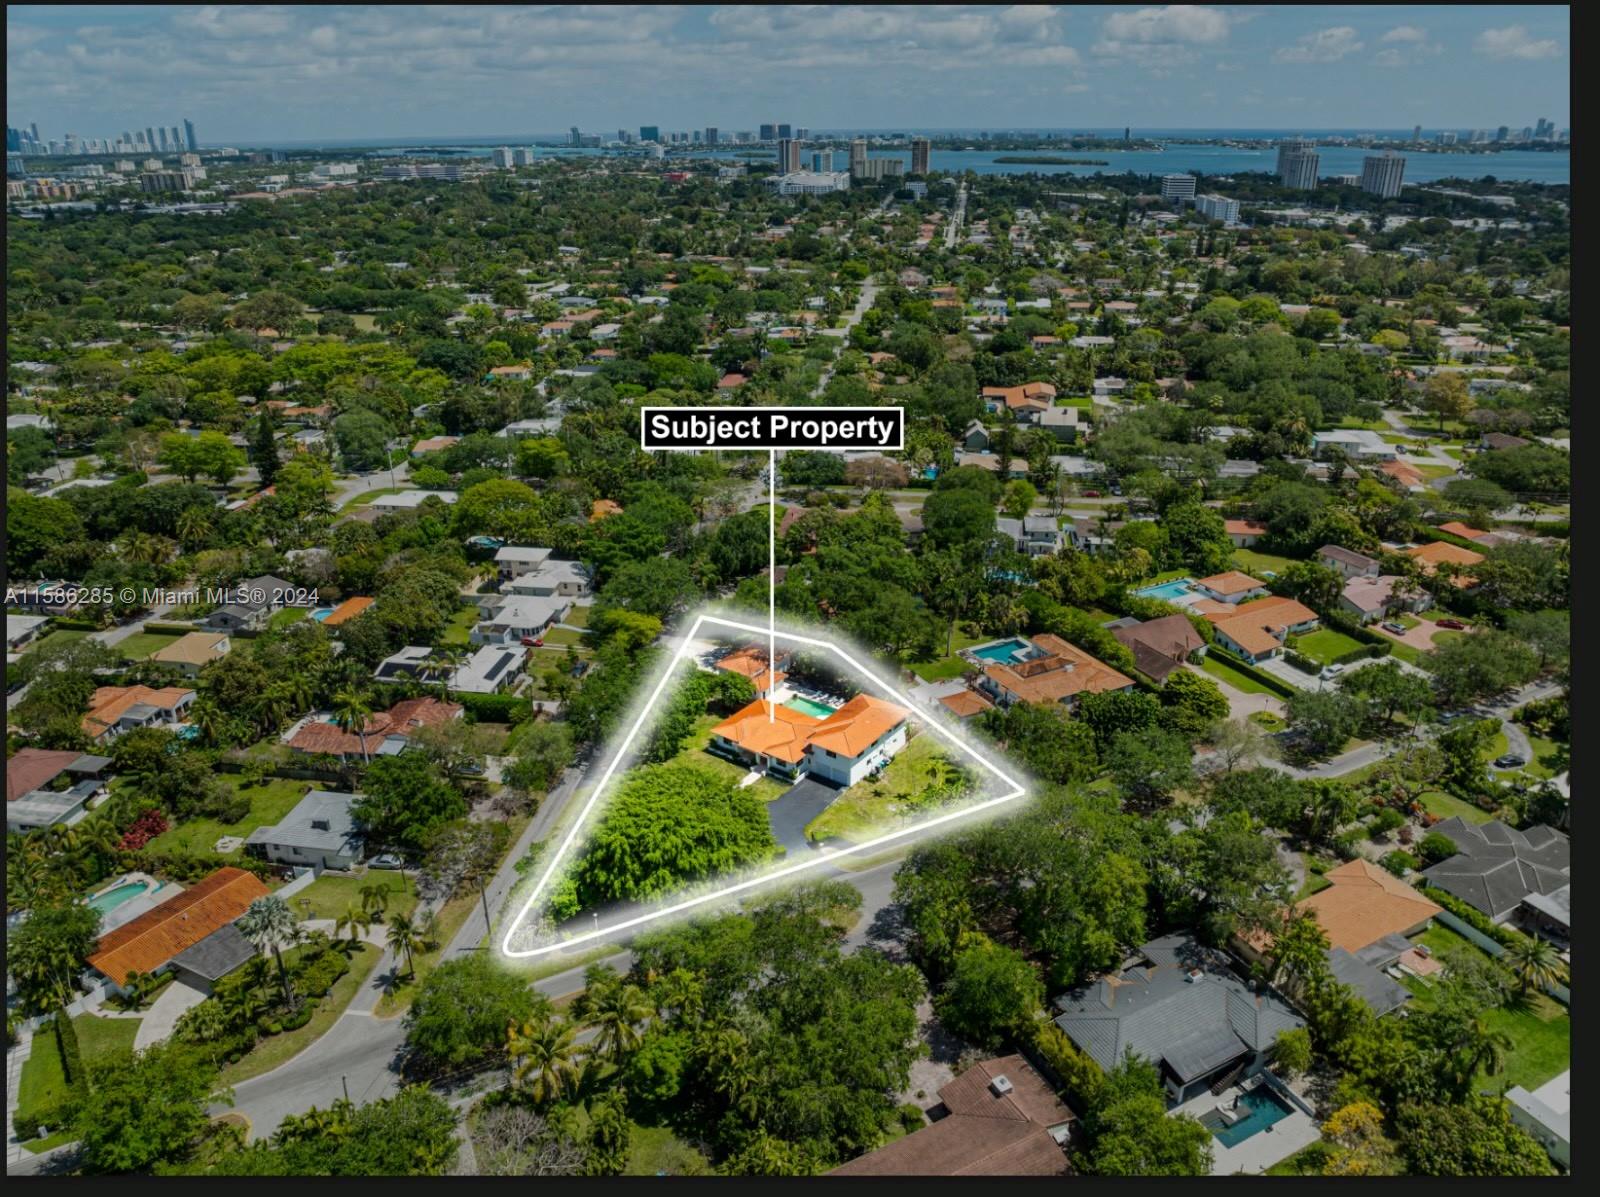 Property for Sale at 11095 Griffing Blvd Blvd, Biscayne Park, Miami-Dade County, Florida - Bedrooms: 4 
Bathrooms: 6  - $3,750,000